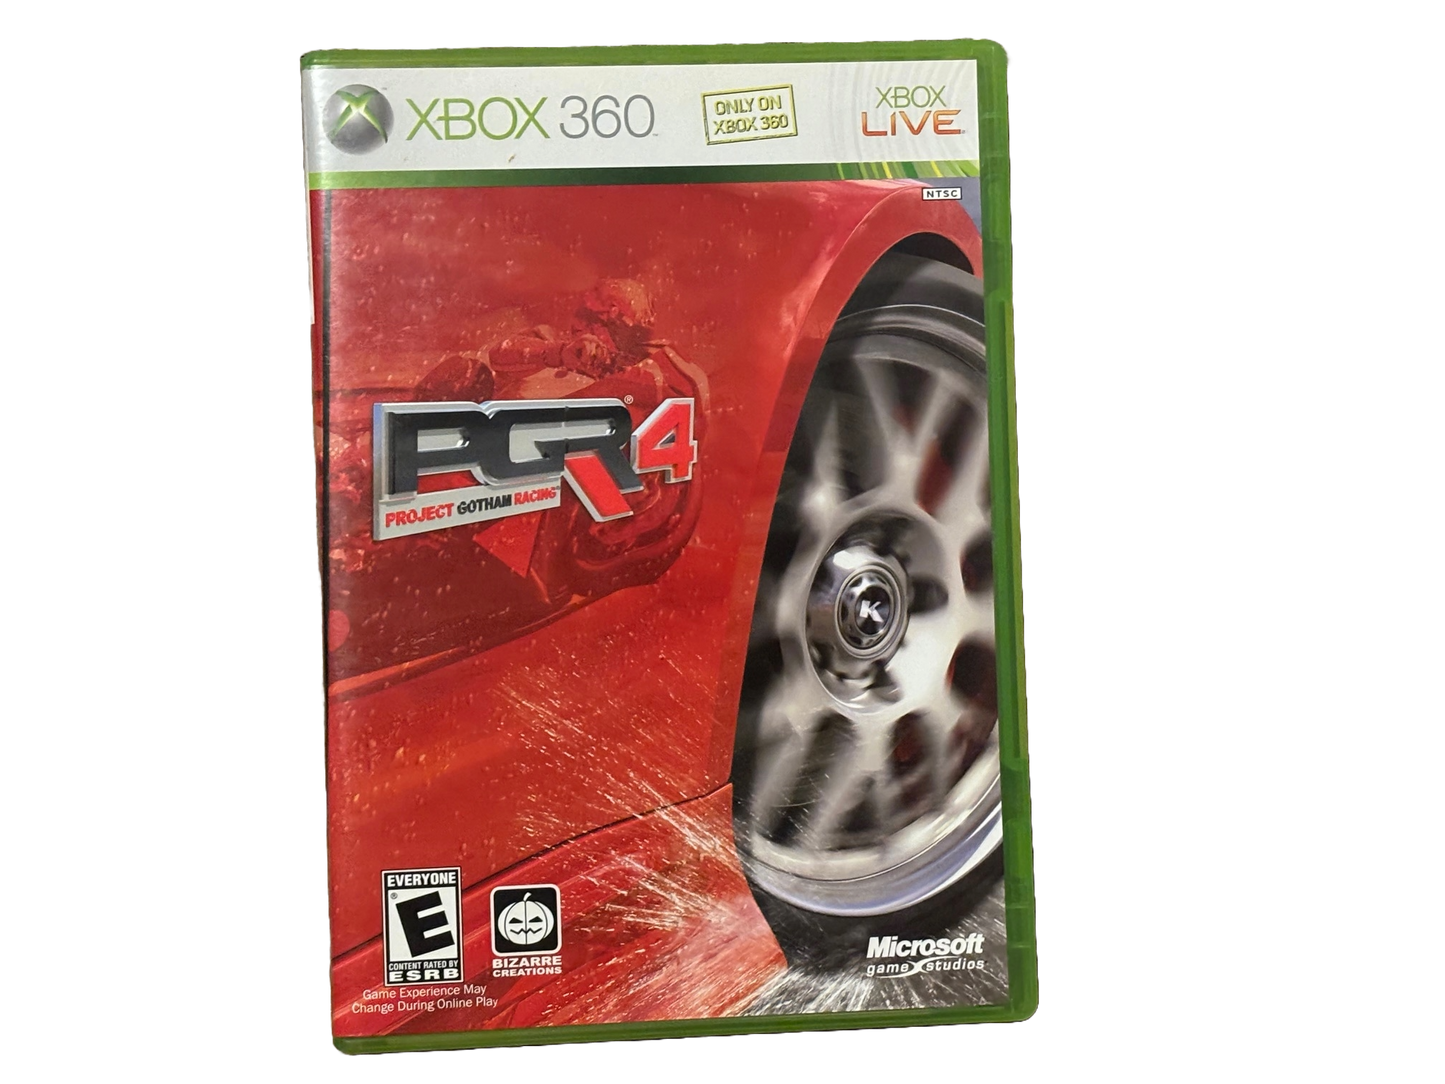 Project Gotham Racing 4 Microsoft Xbox 360 Video Game. Complete.